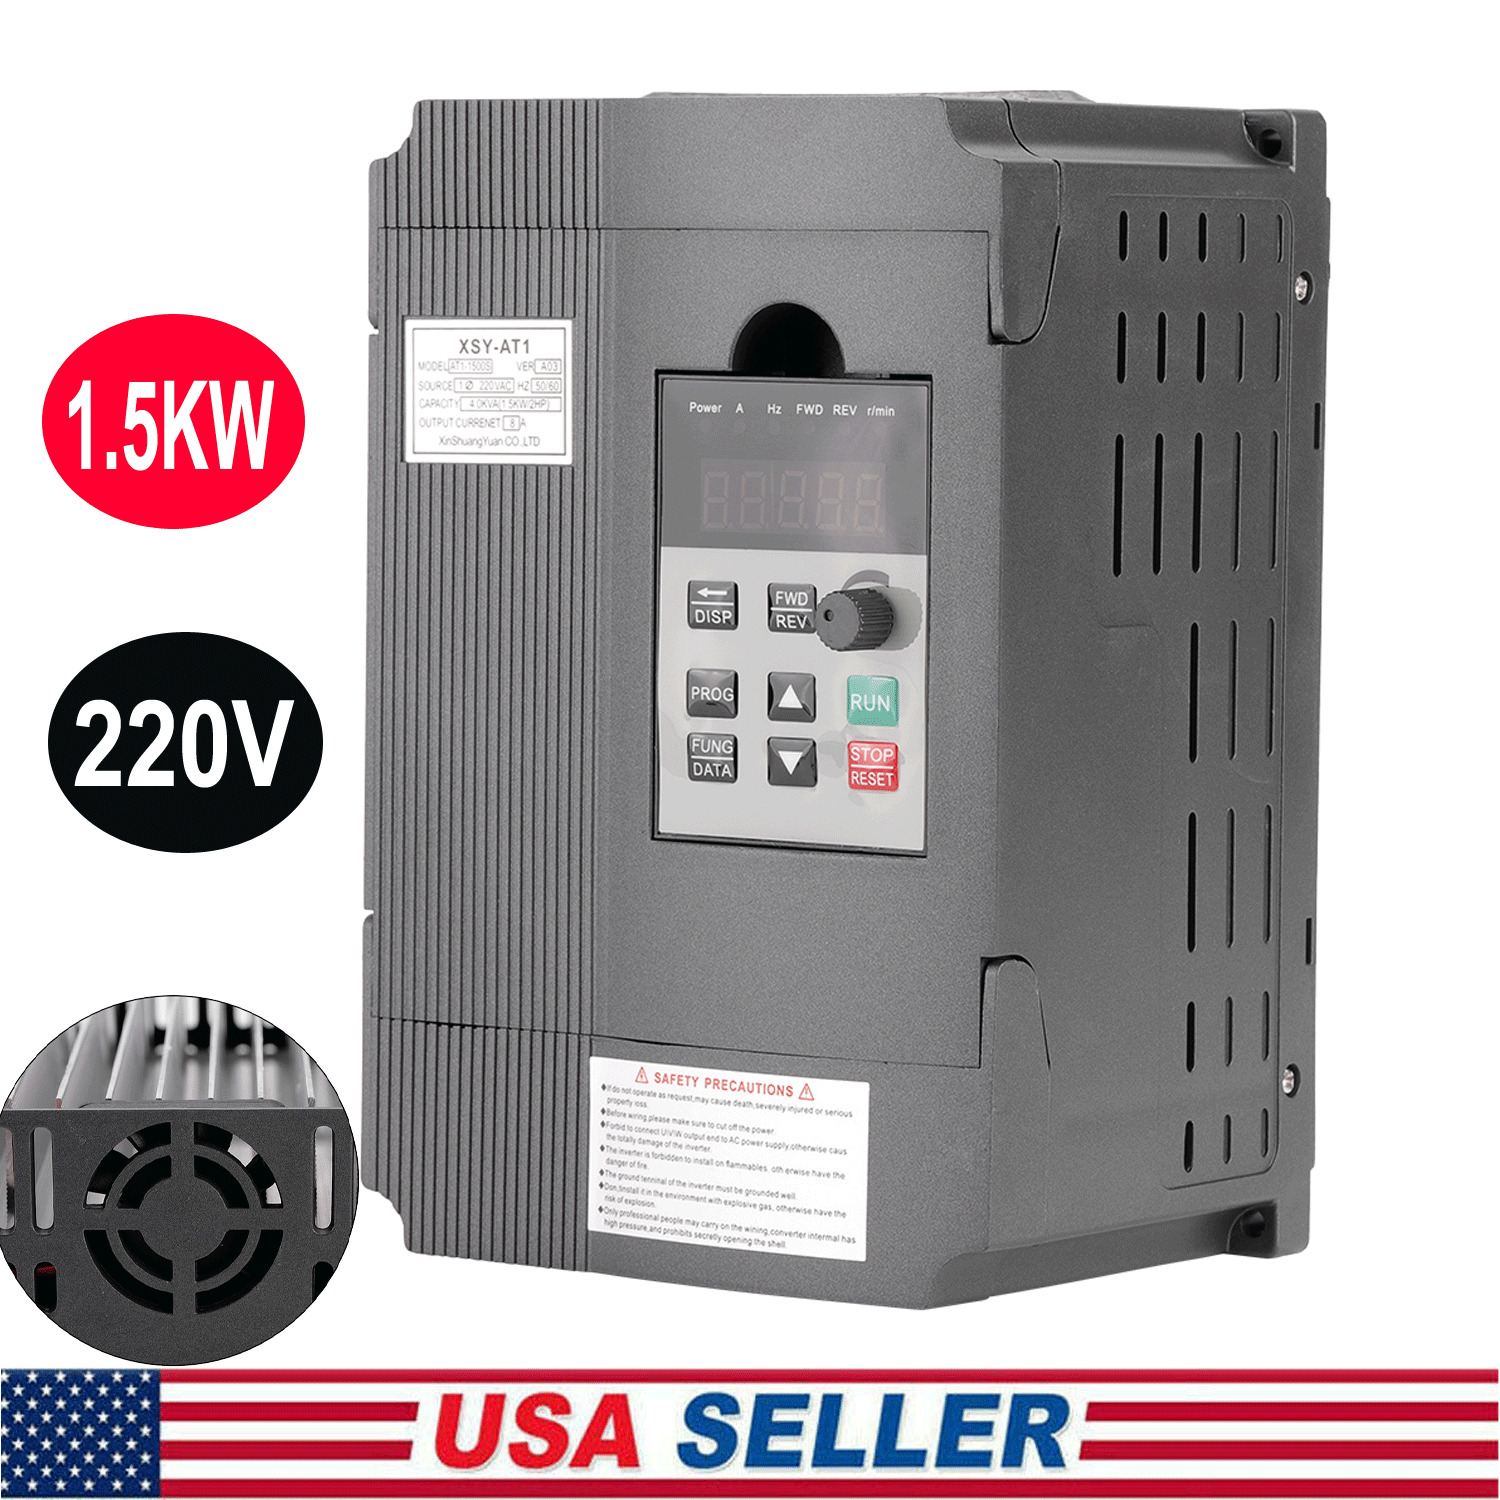 VFD Single Phase Variable Frequency Drive Inverter Motor Speed Control 1.5KW